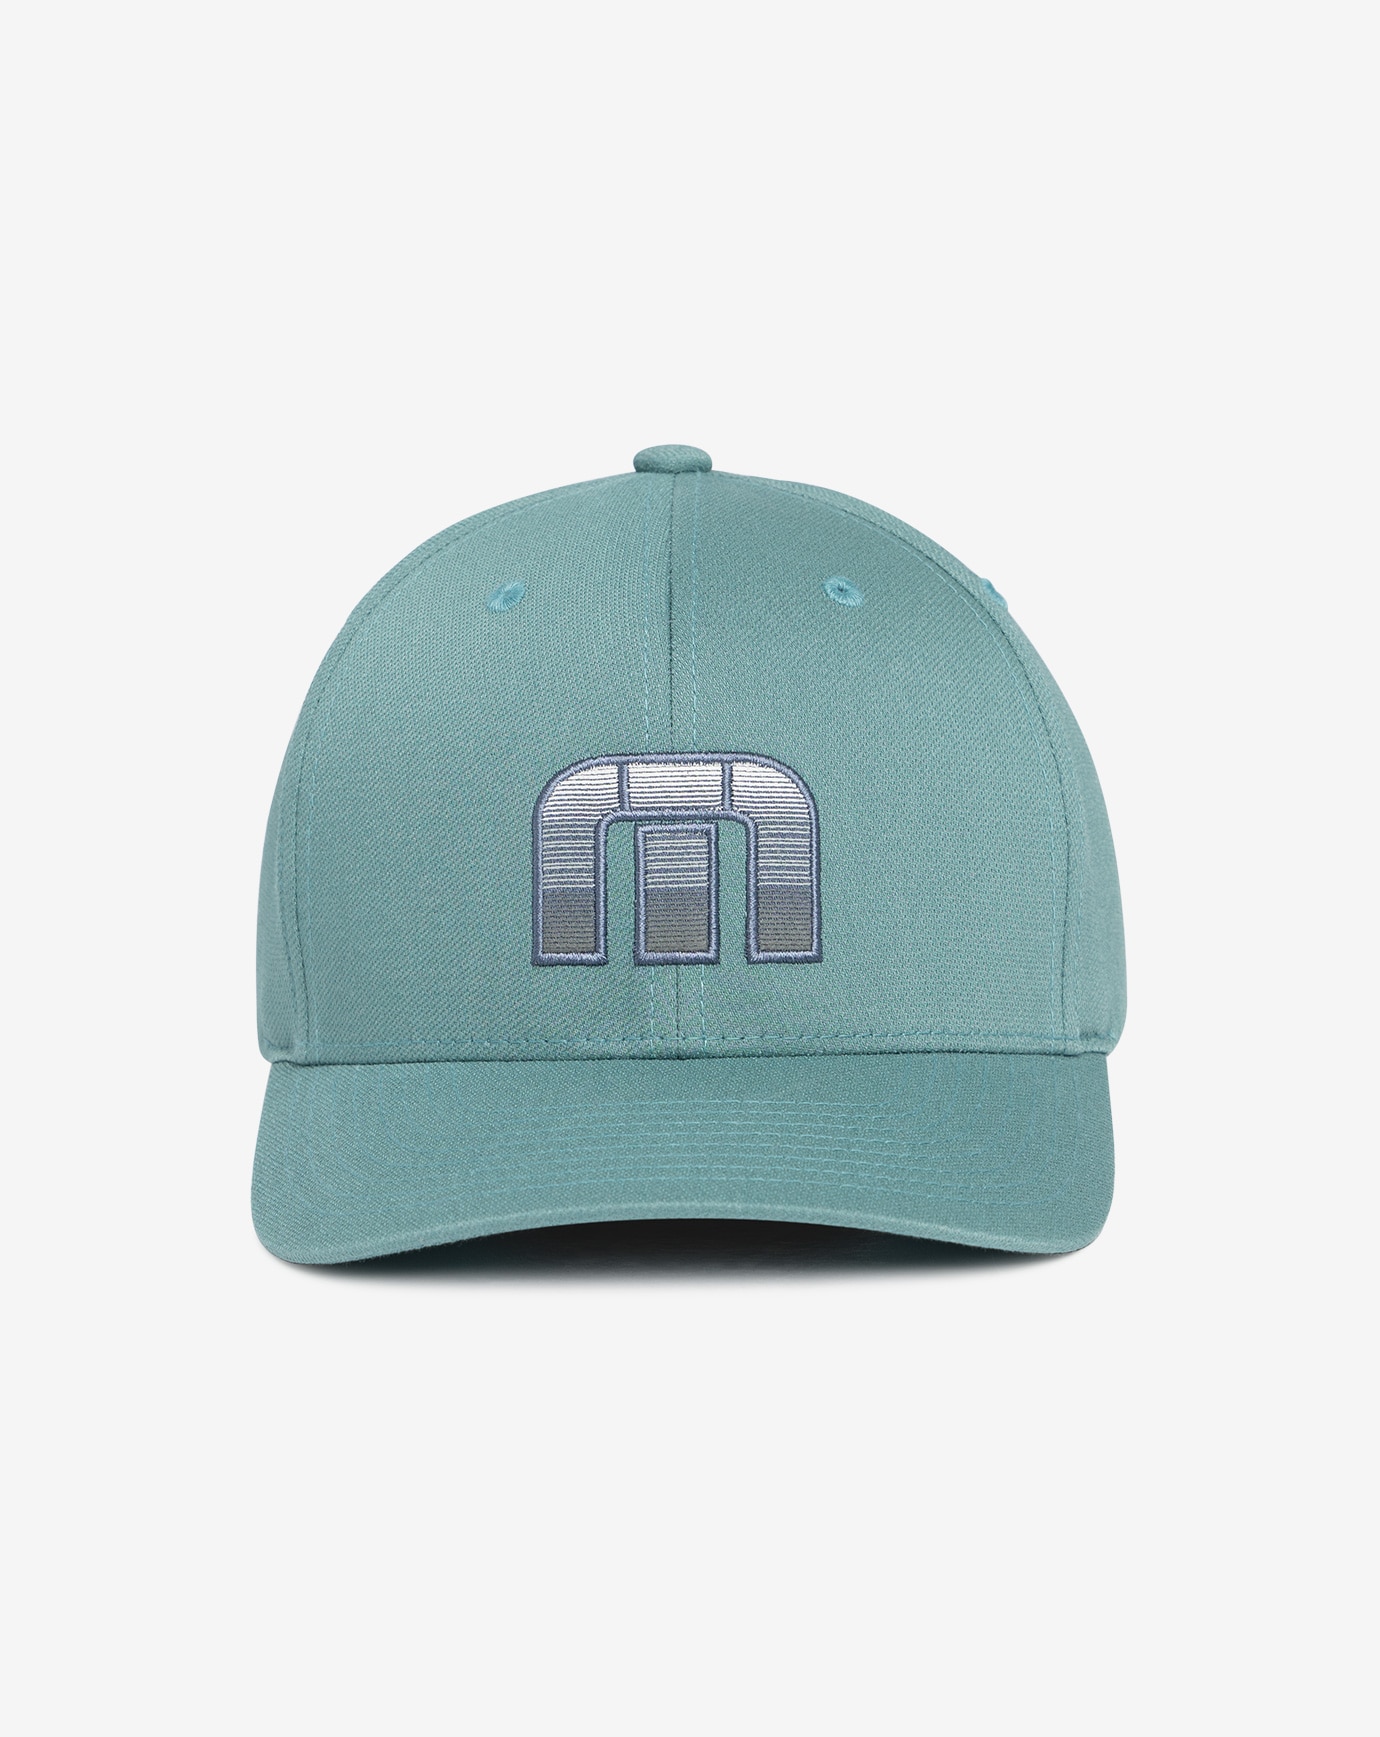 LIVE BLIND YOUTH HAT